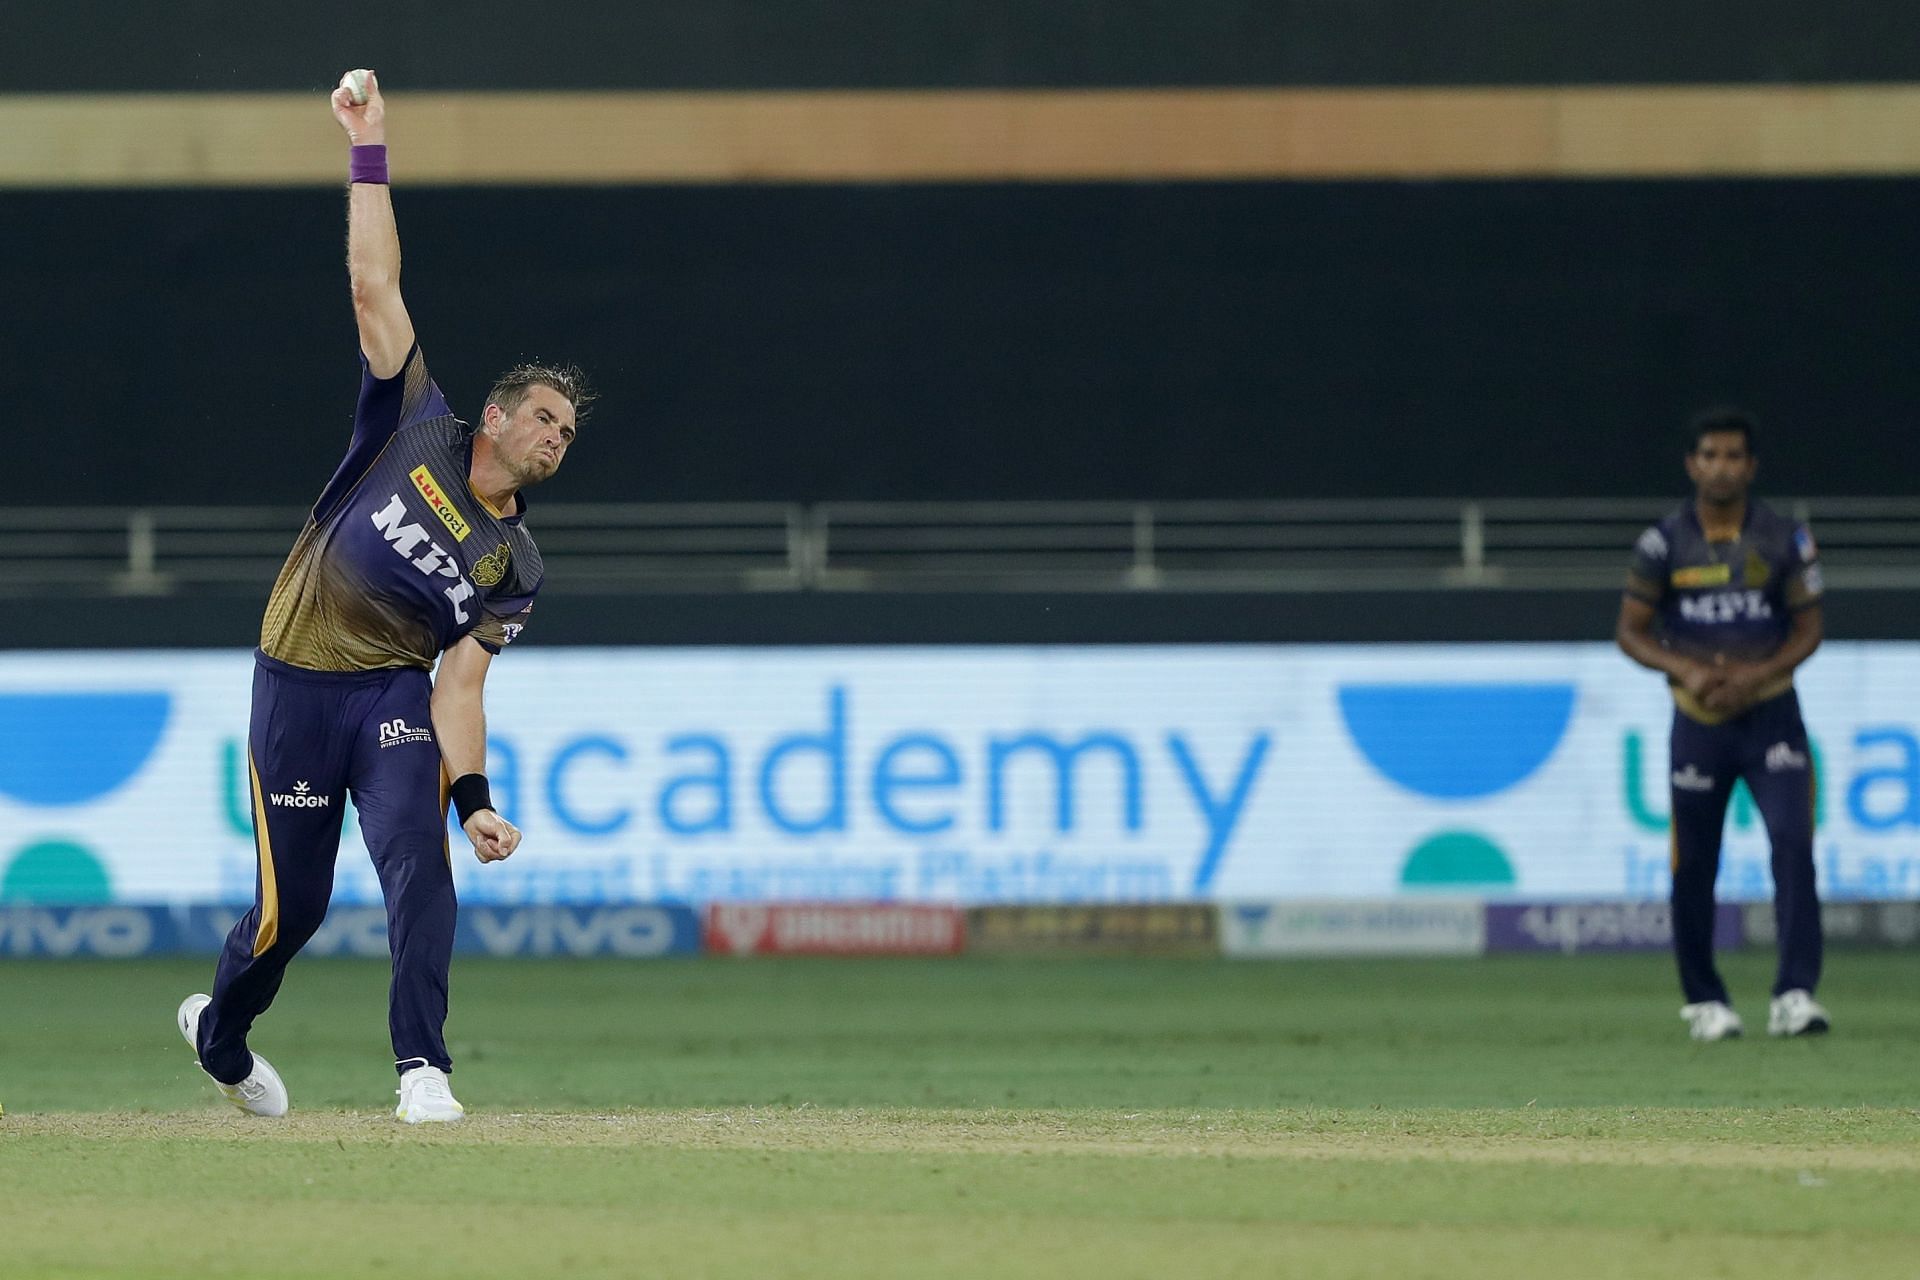 KKR could well look to get Tim Southee back at the IPL 2022 Auction (Picture Credits: Saikat Das/Sportzpics for IPL).